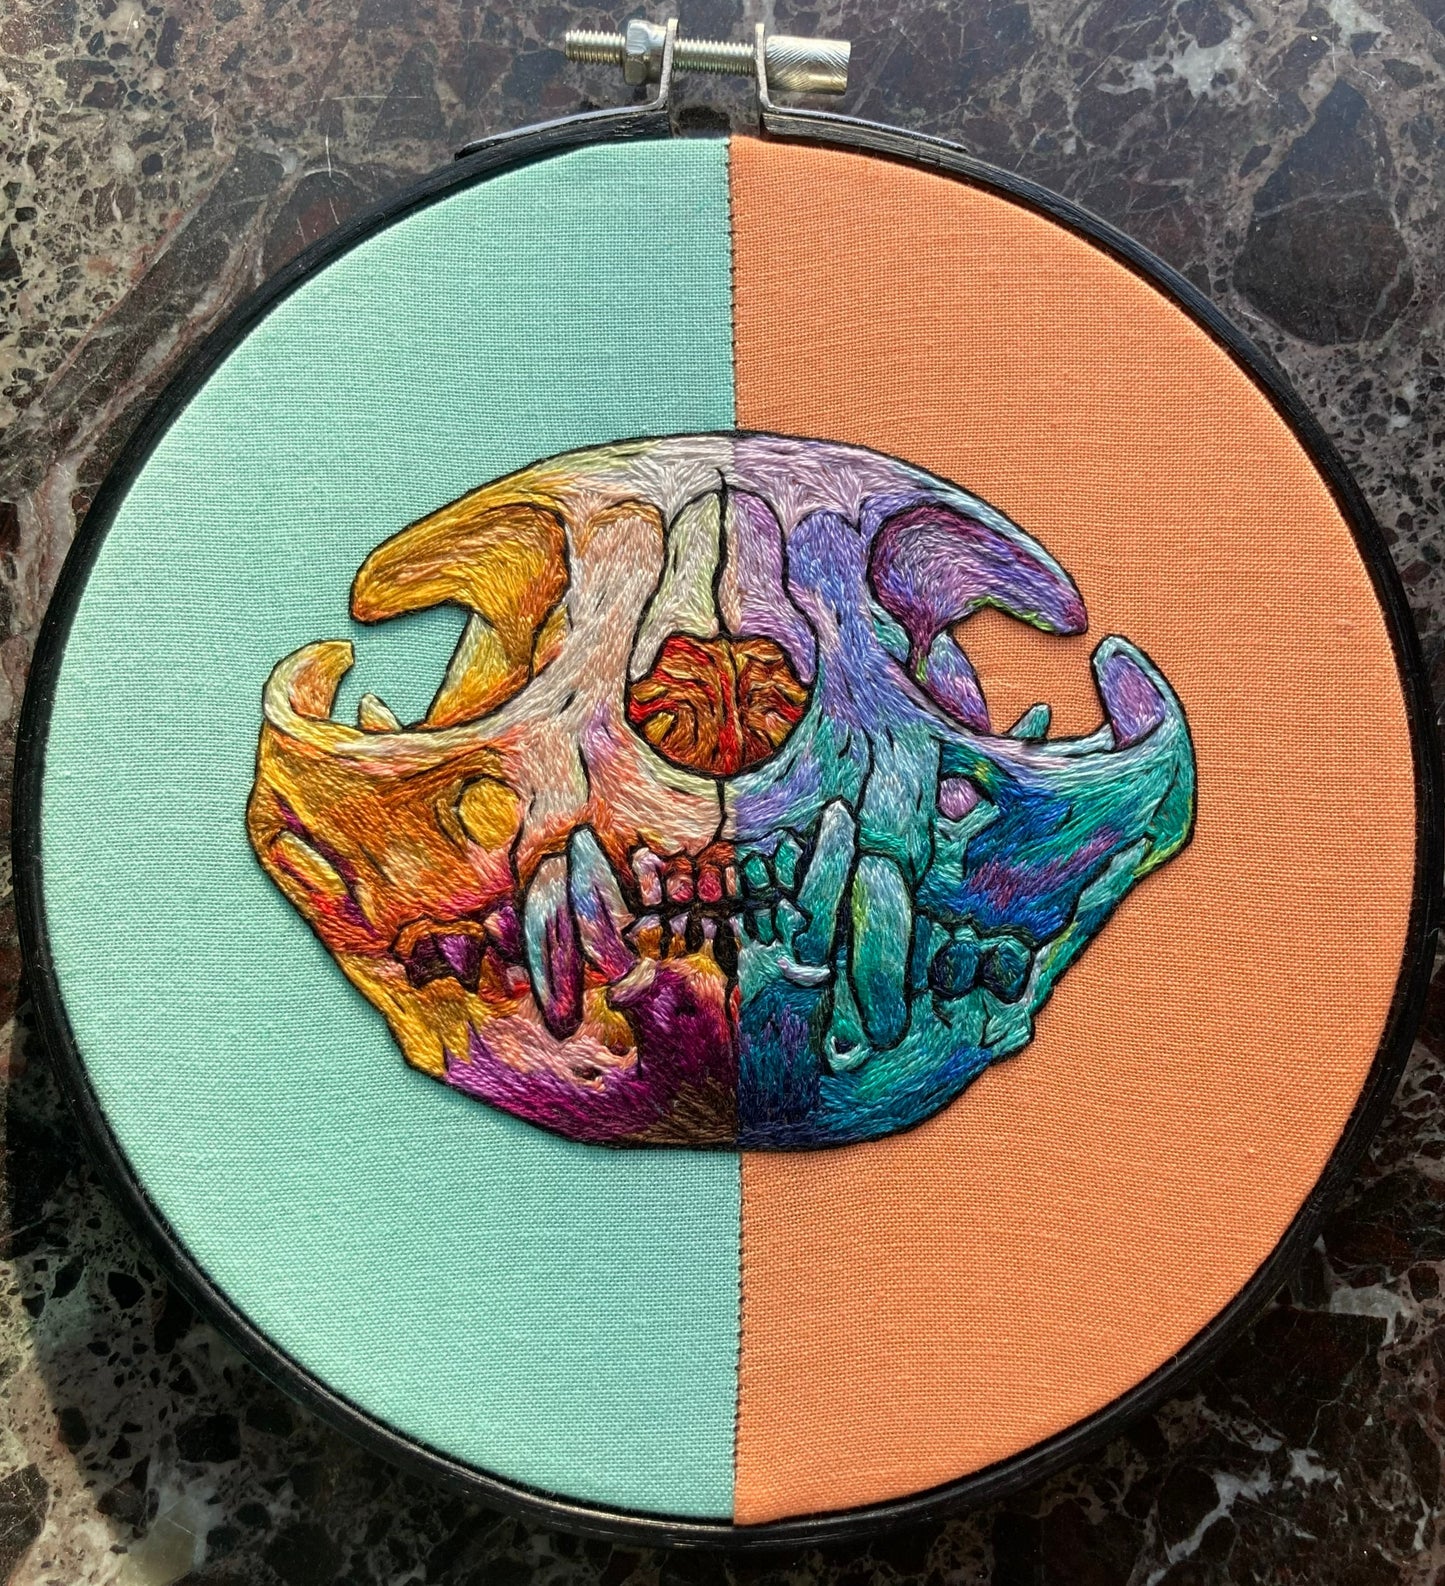 a vibrantly colored embroidered cat skull in a black hoop sits on a black marble surface. The fabric in the hoop is aqua on the left side and apricot on the right, and the stitching mirrors that split with warm tones on the left and cool tones on the right. 